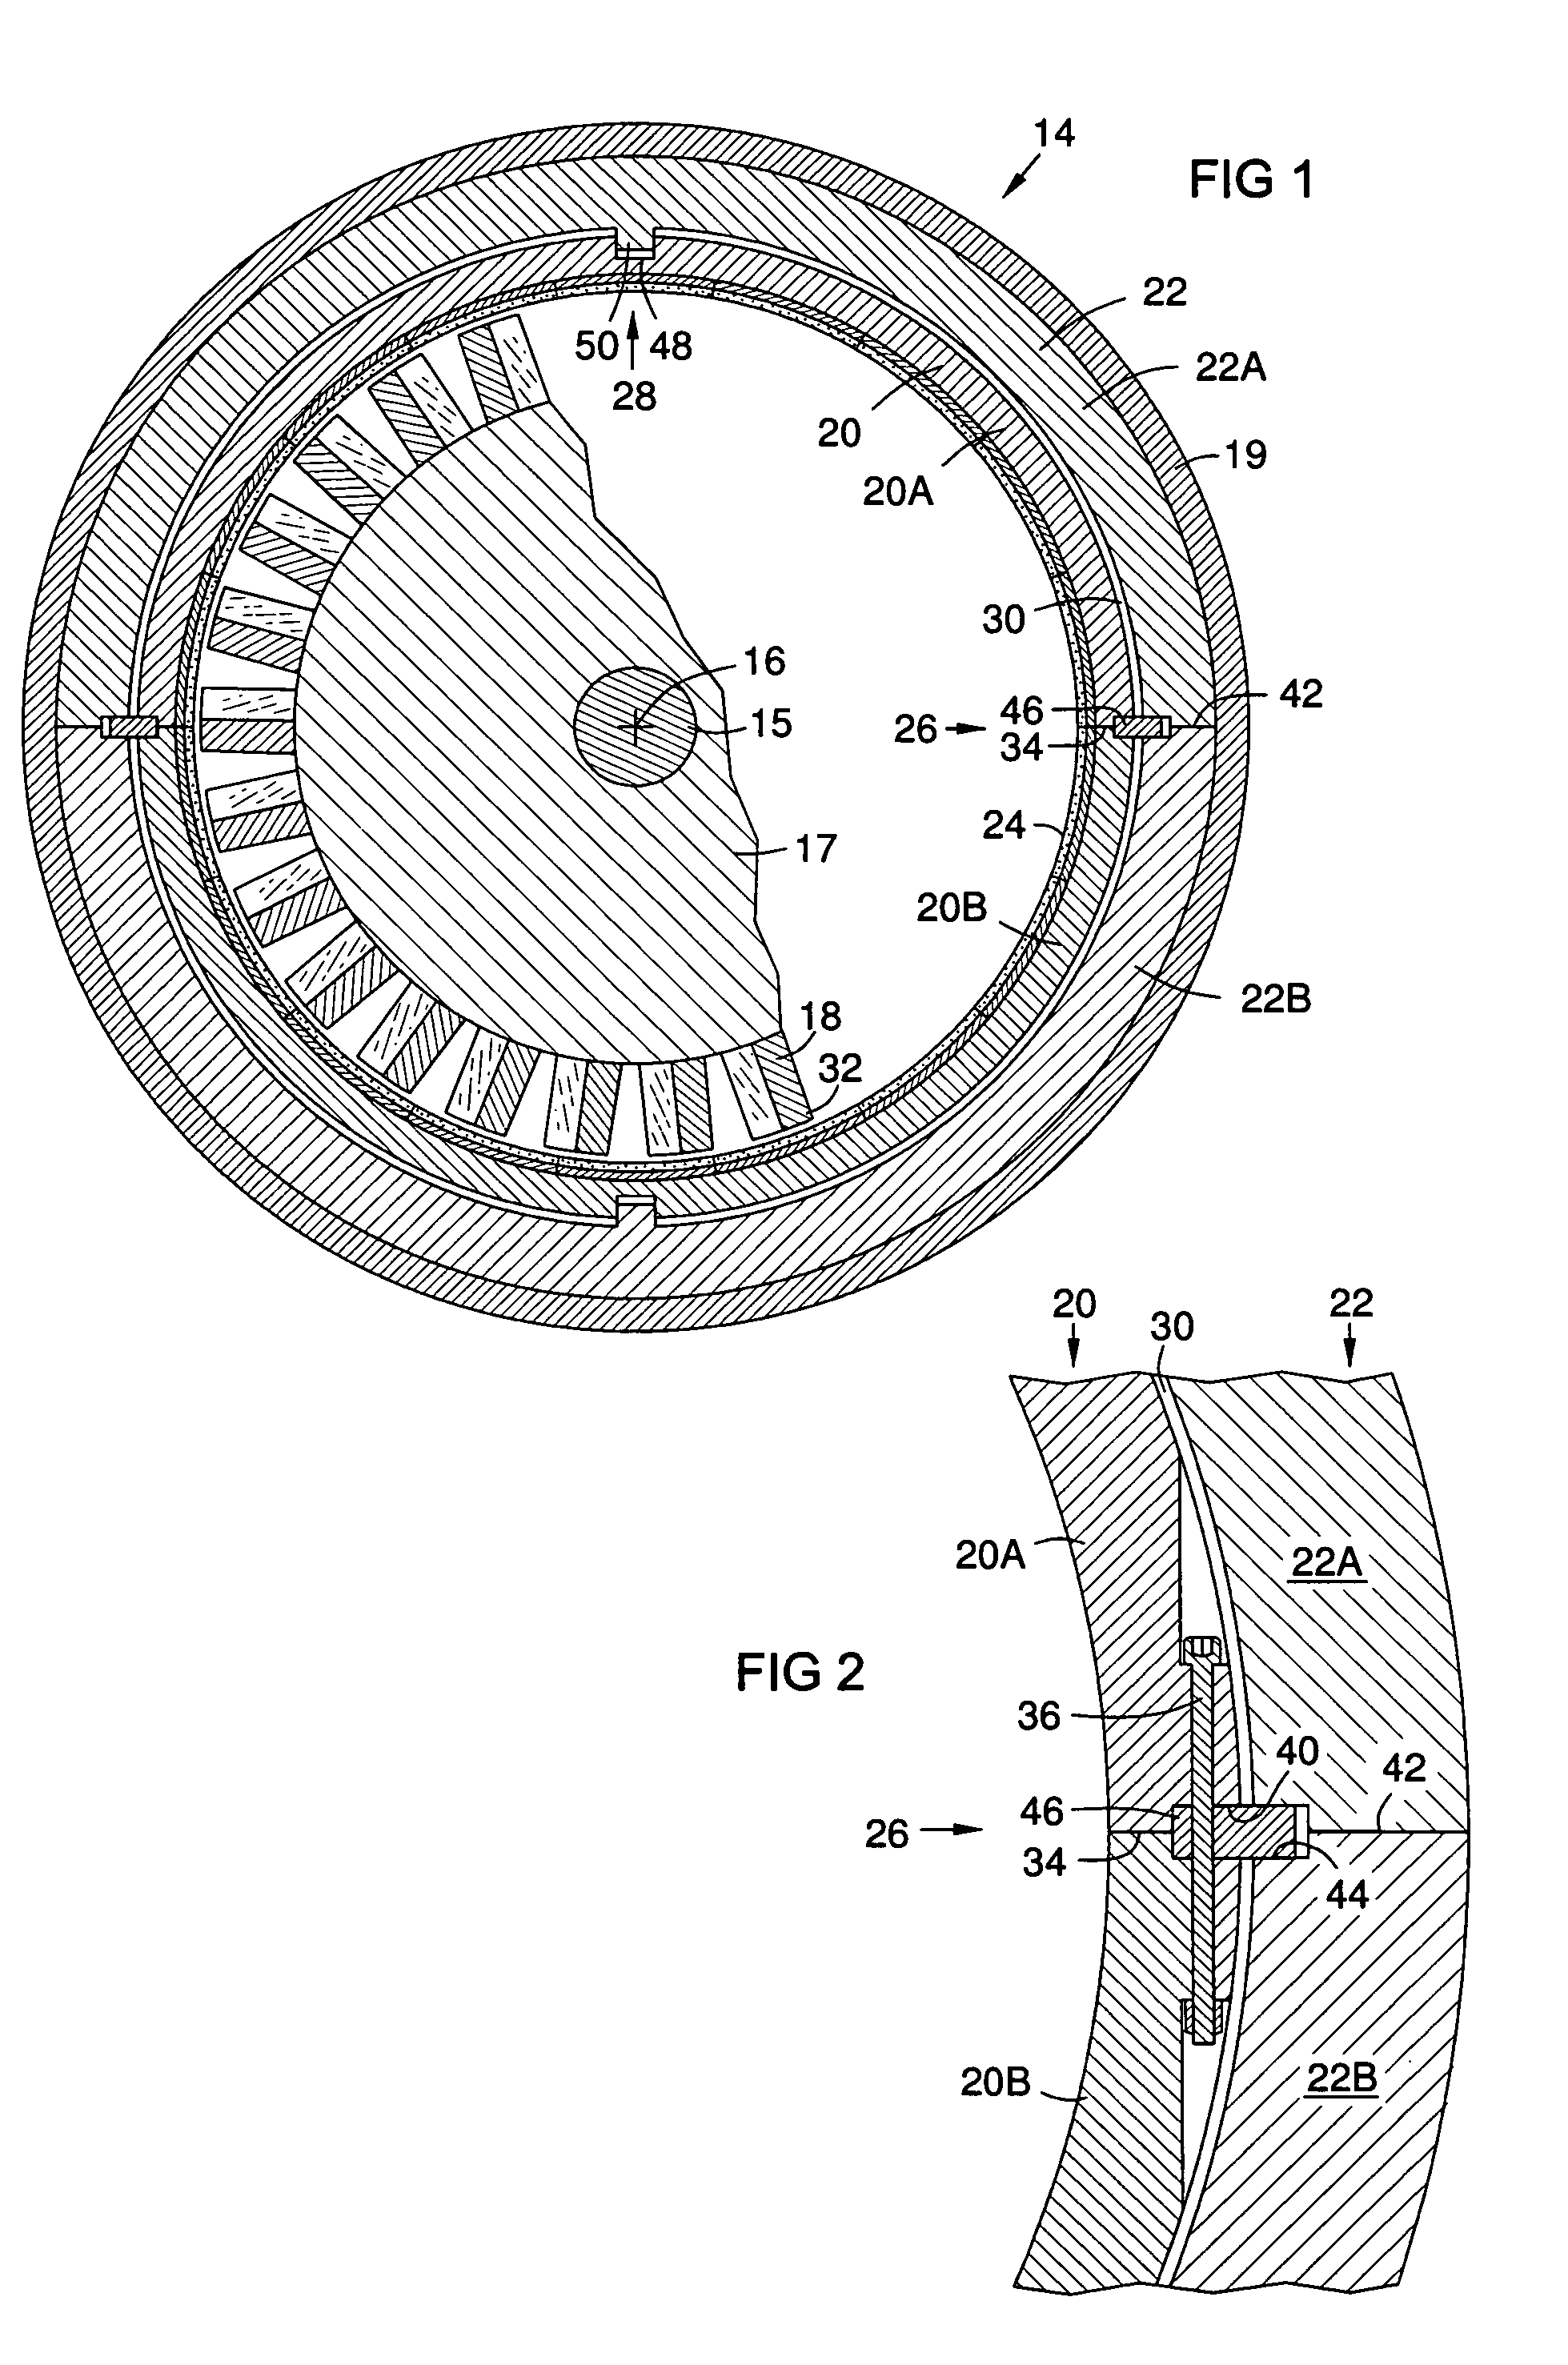 Inner ring with independent thermal expansion for mounting gas turbine flow path components